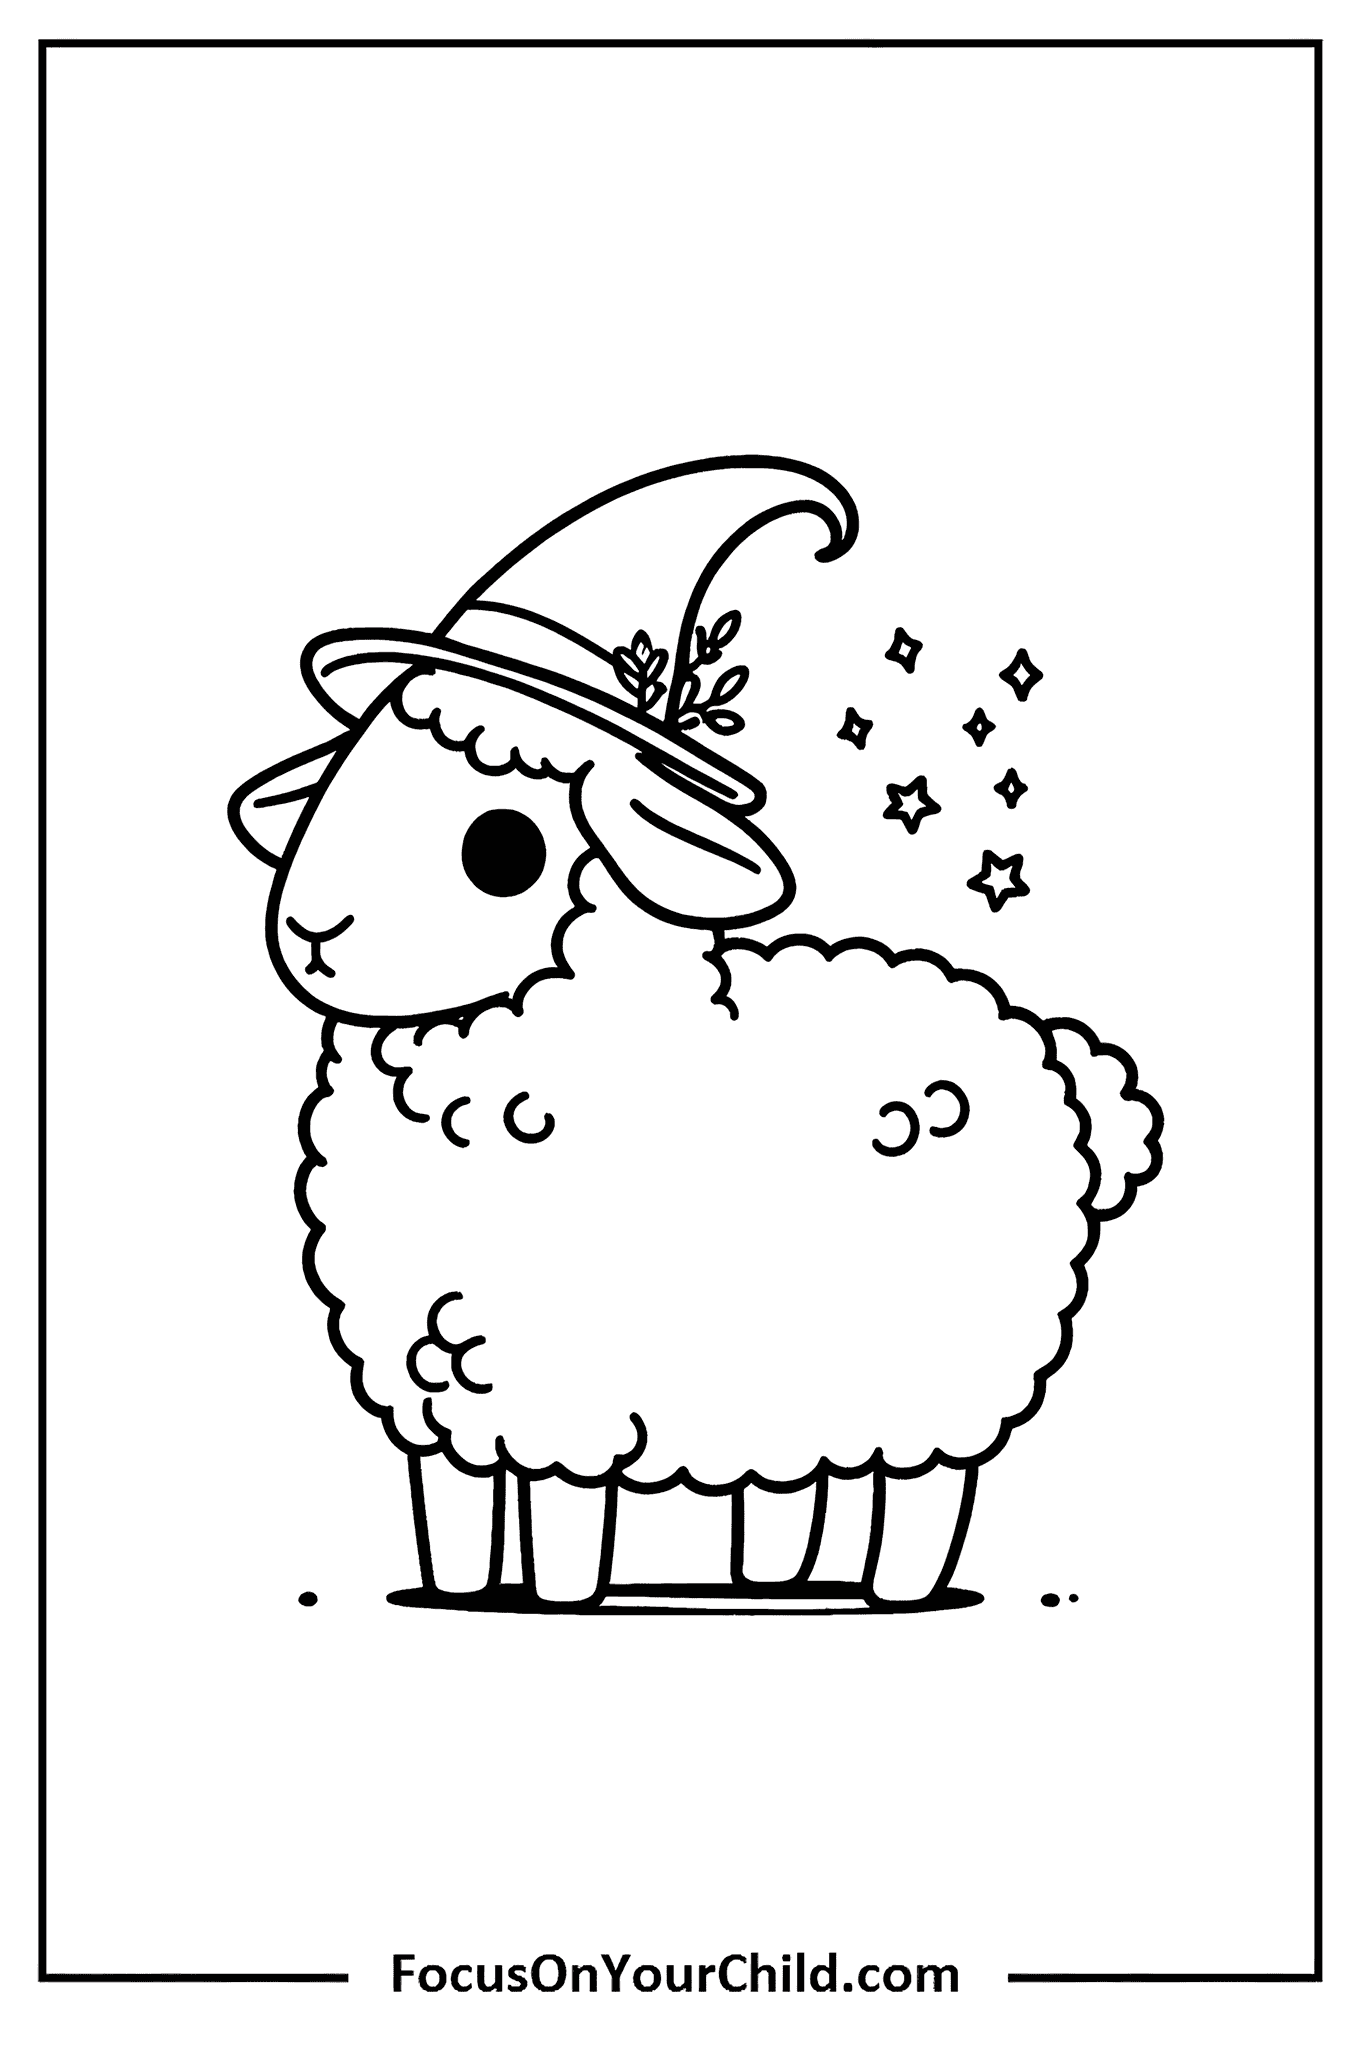 Whimsical sheep with witchs hat casting magical spell in enchanting black and white drawing.